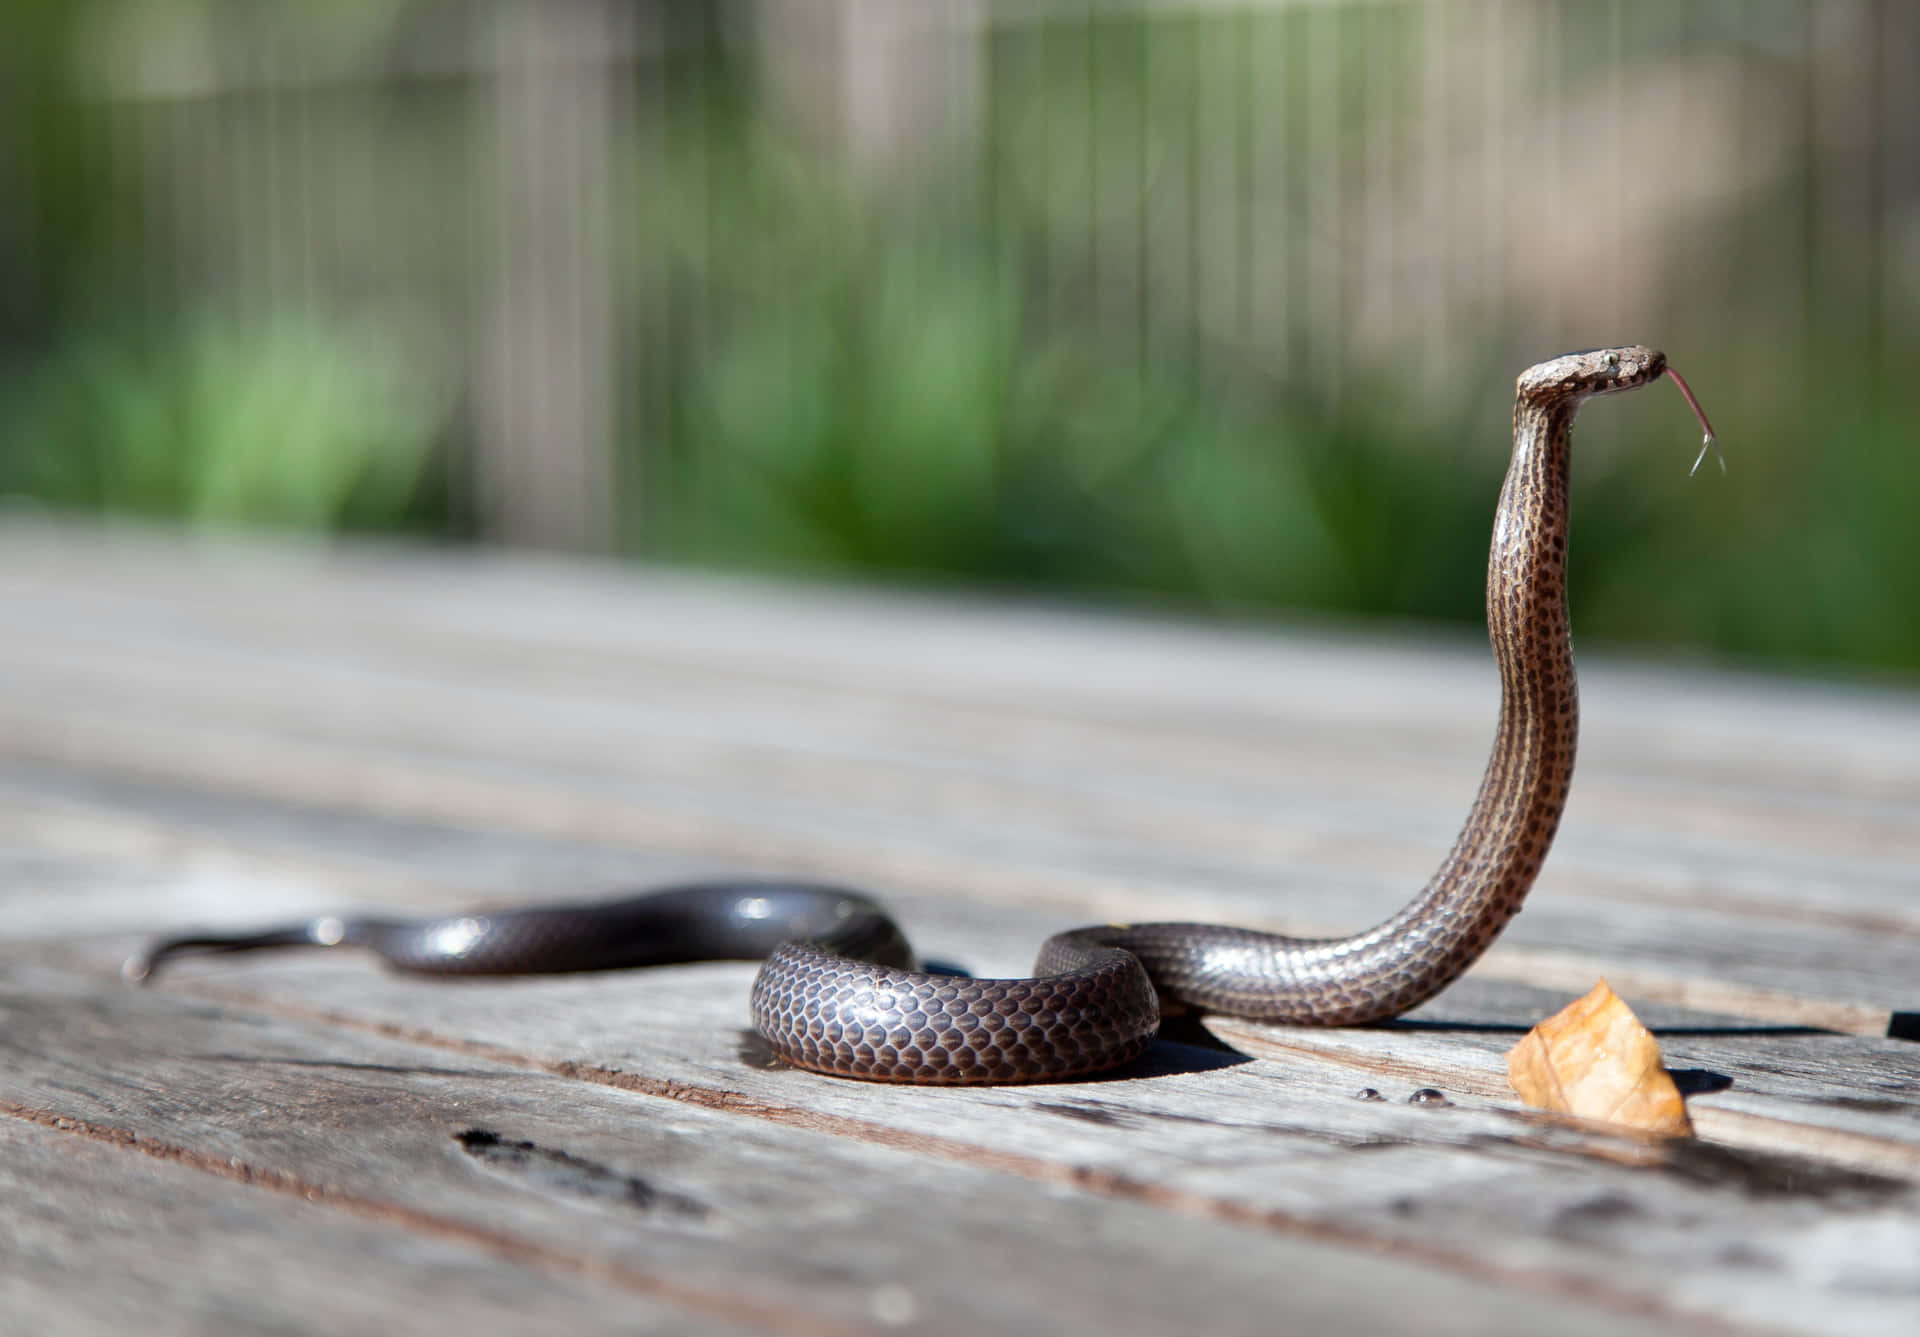 Stunning close-up of a Brown Snake in its natural habitat Wallpaper